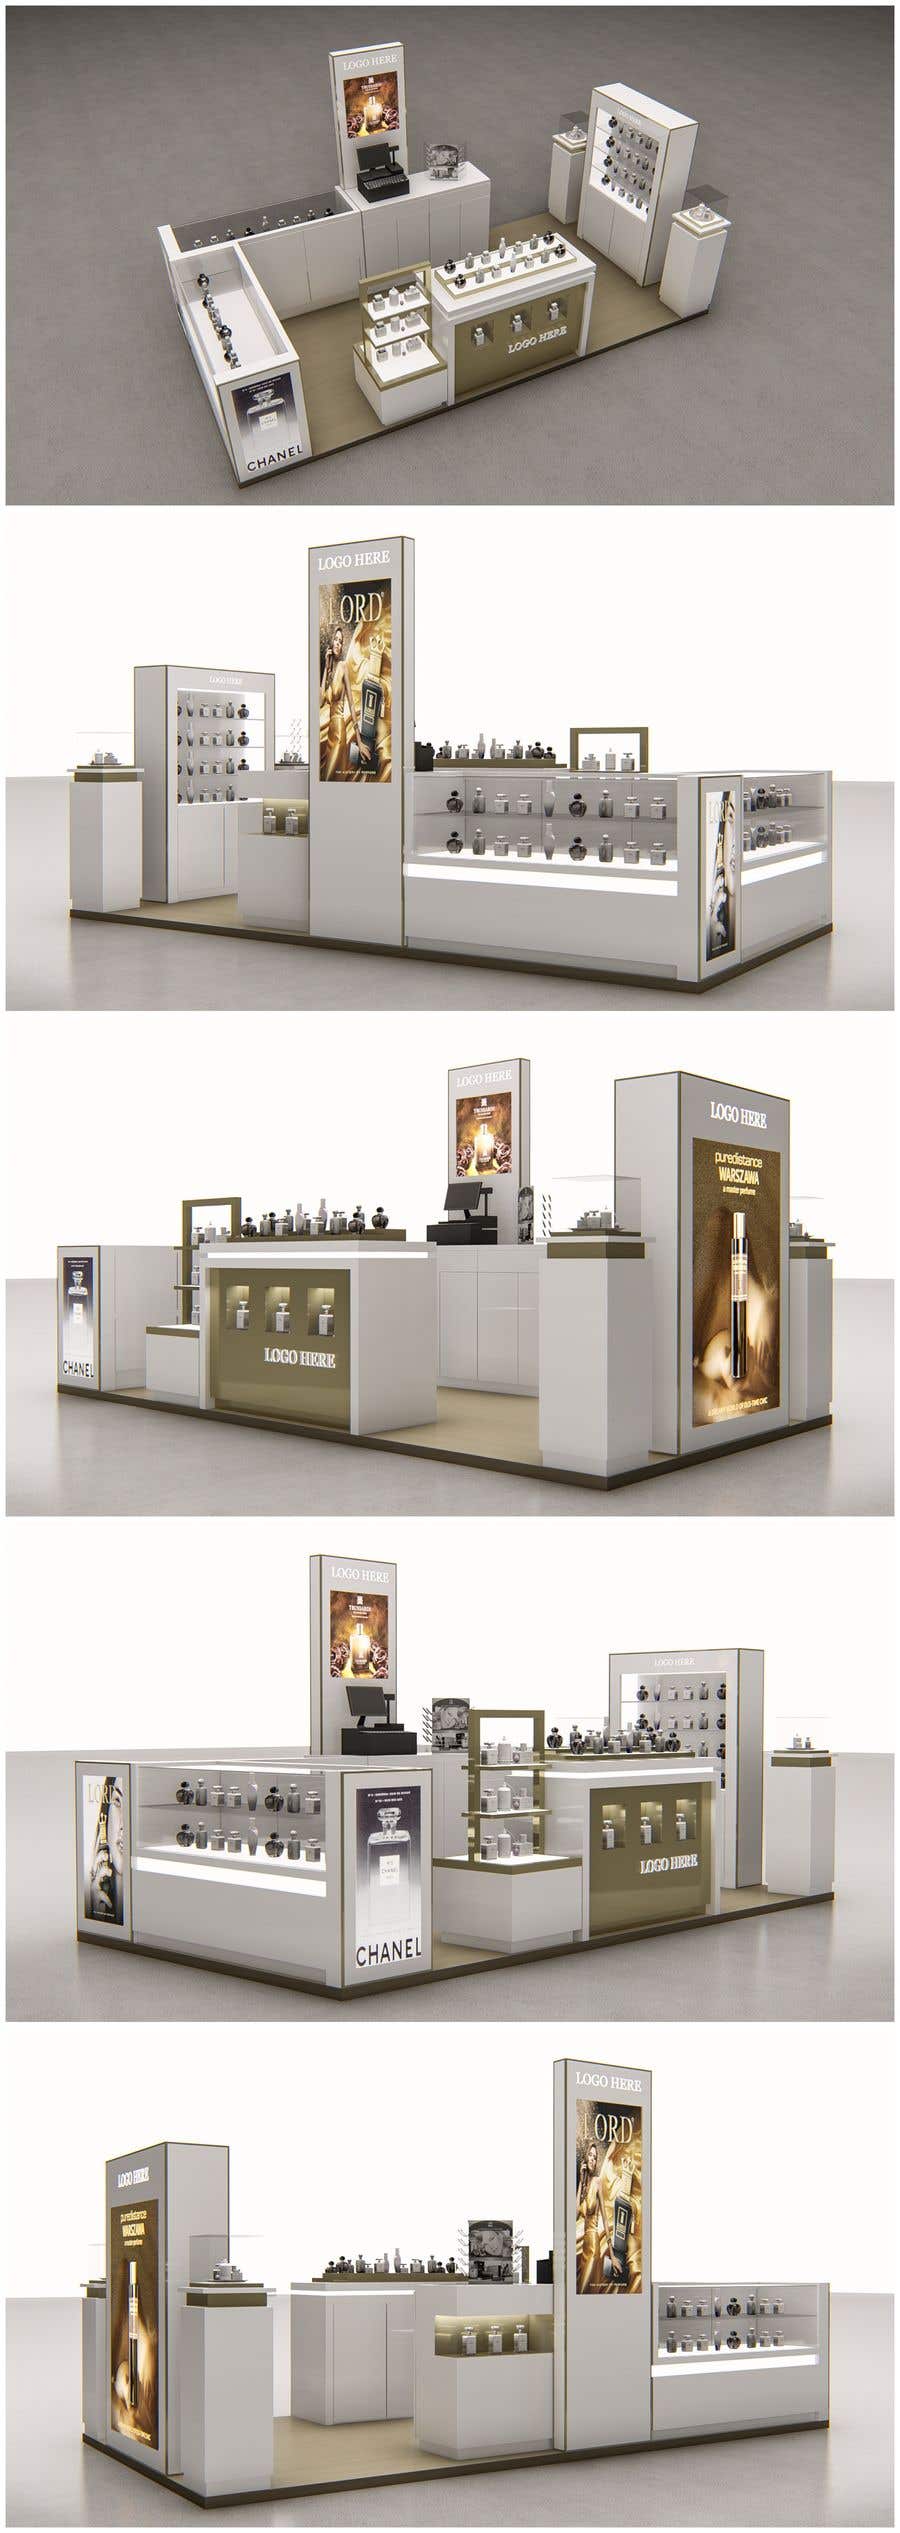 Contest Entry #22 for                                                 Design arhitectural stand-insula parfumerie mall
                                            